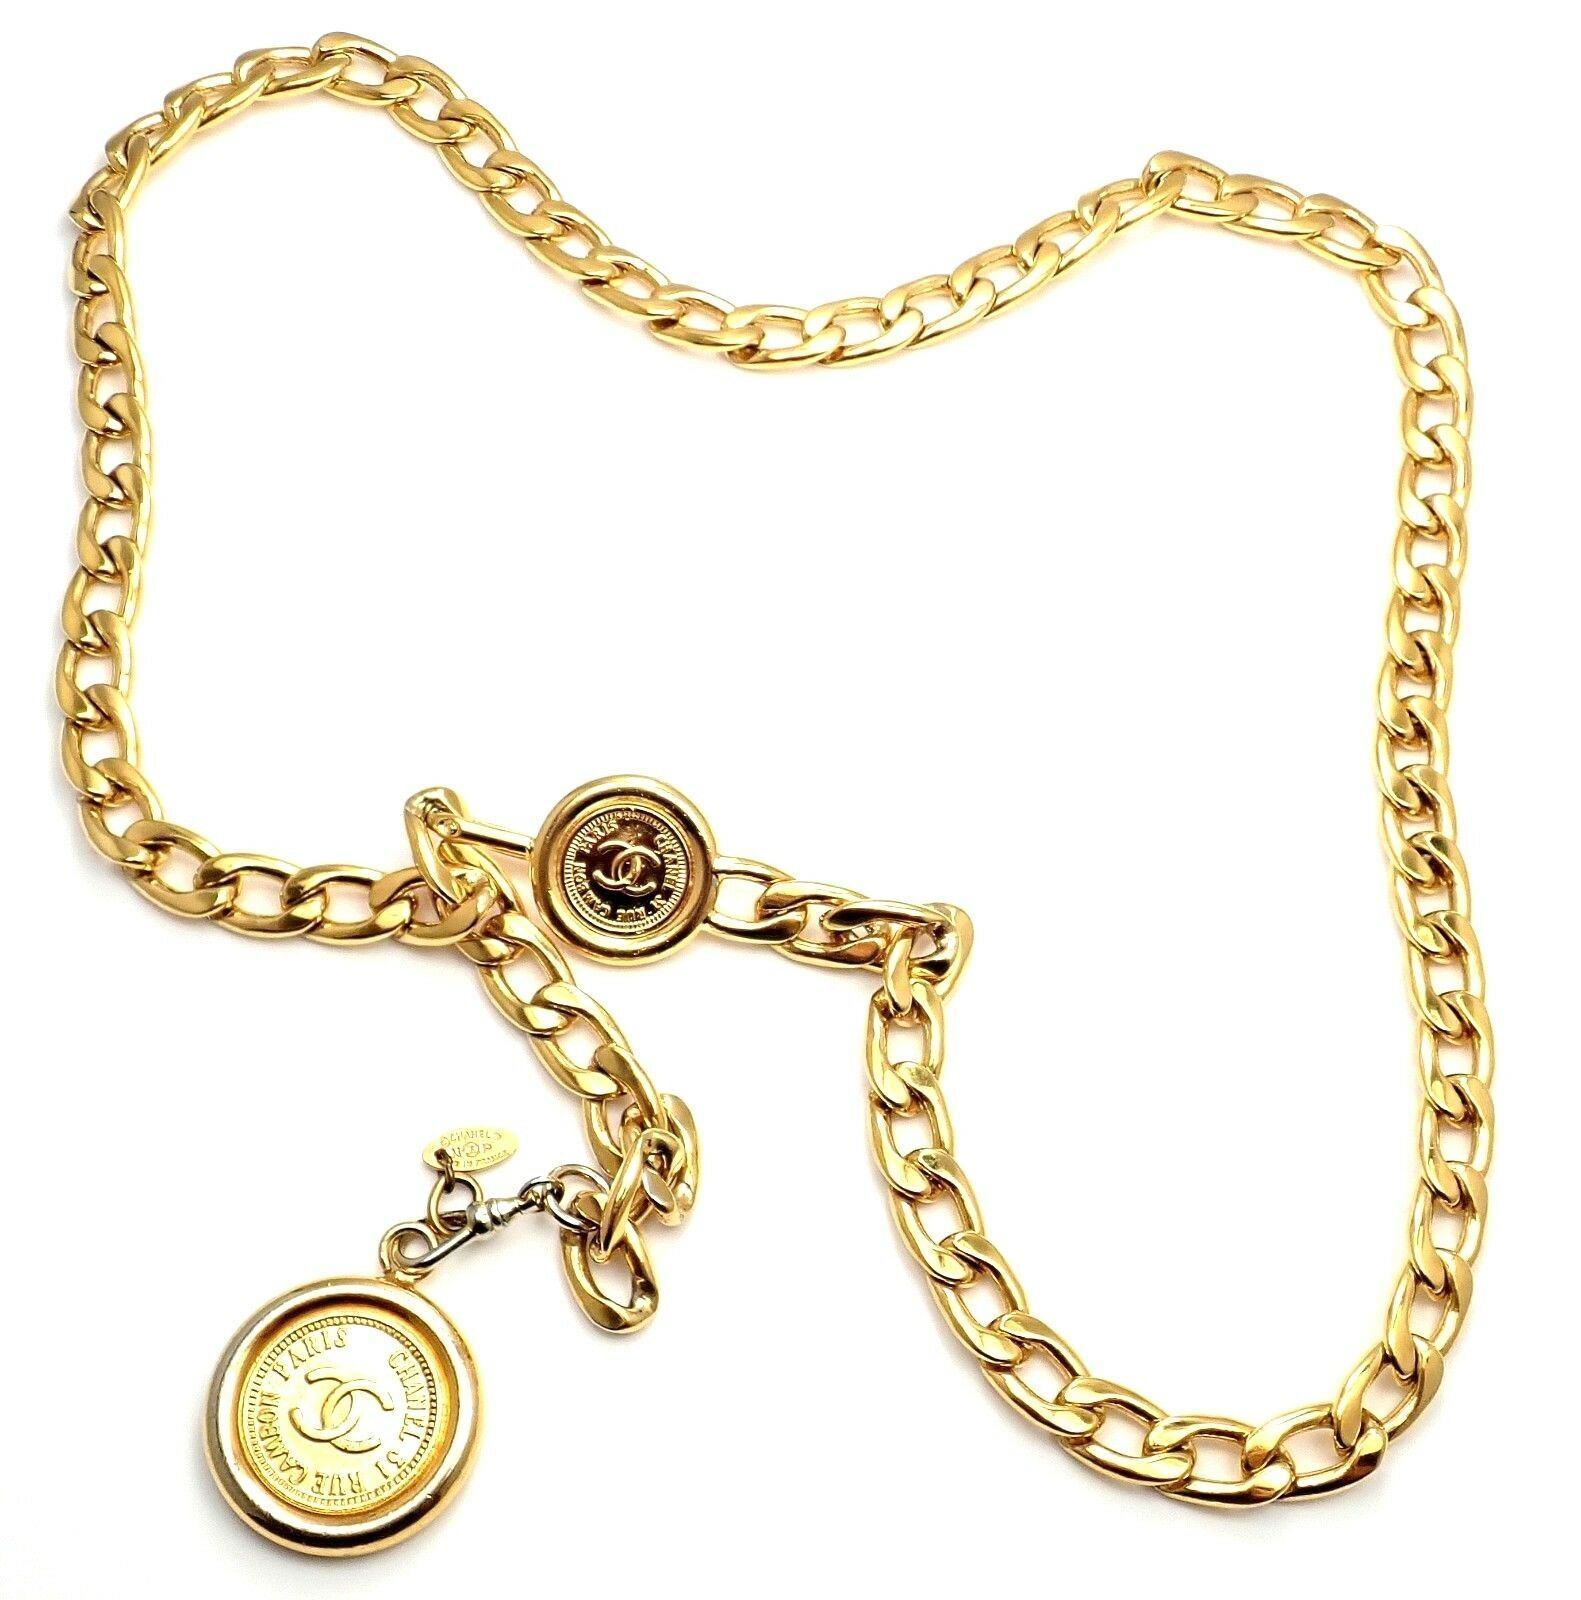 Chanel Jewelry & Watches:Fashion Jewelry:Necklaces & Pendants Amazing Authentic Chanel Gold Tone Draped Clasp Belt Necklace 34"